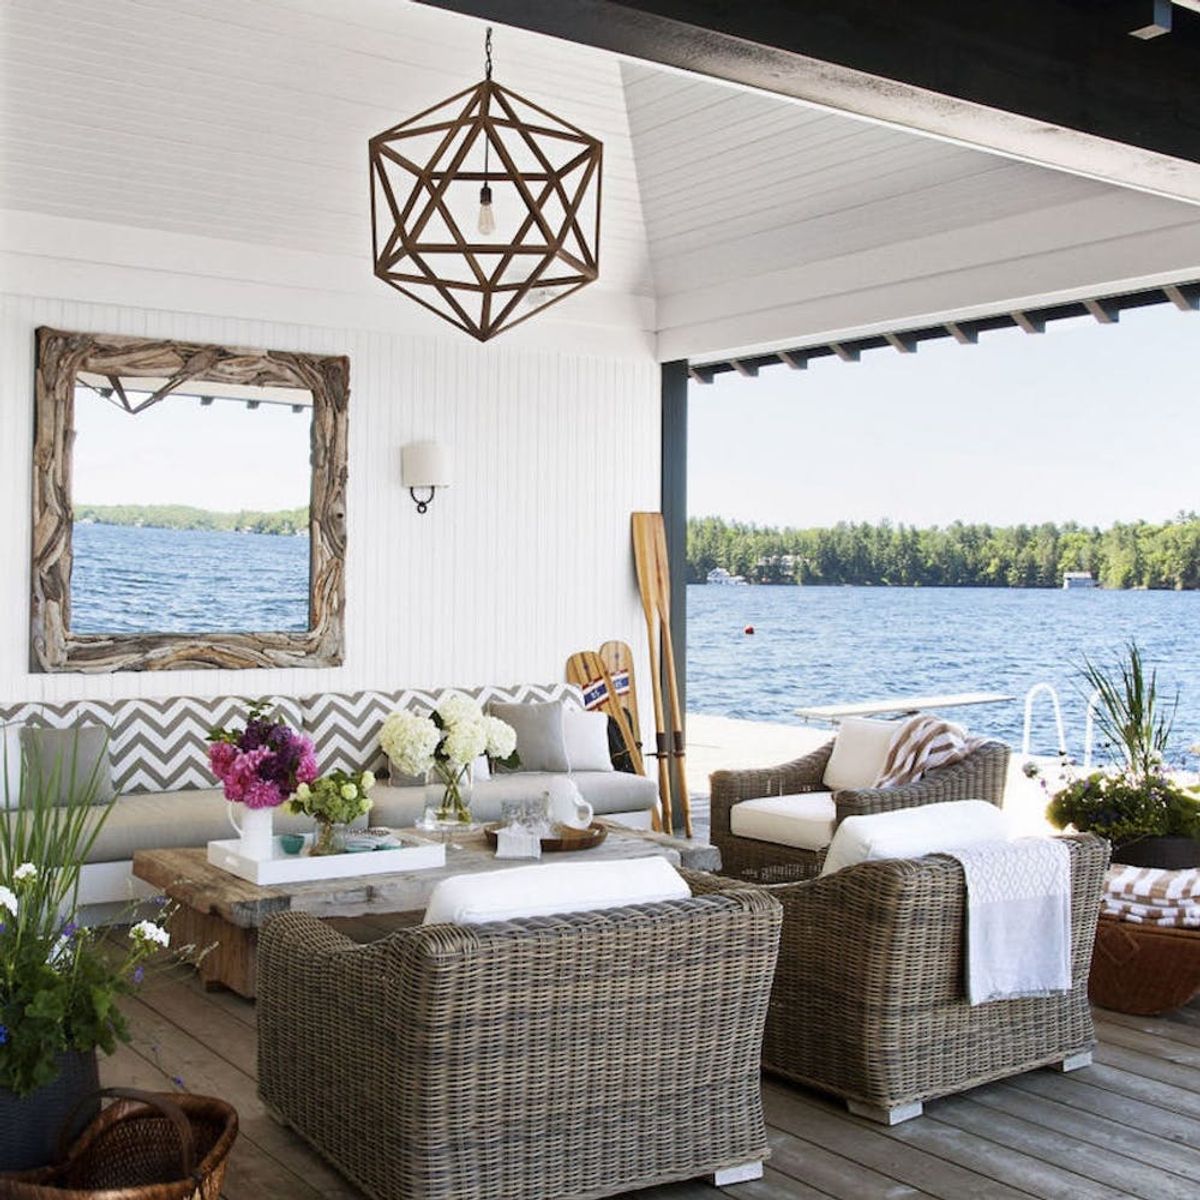 This Designer’s Rustic-Chic Summer Home Is Haute to the Max